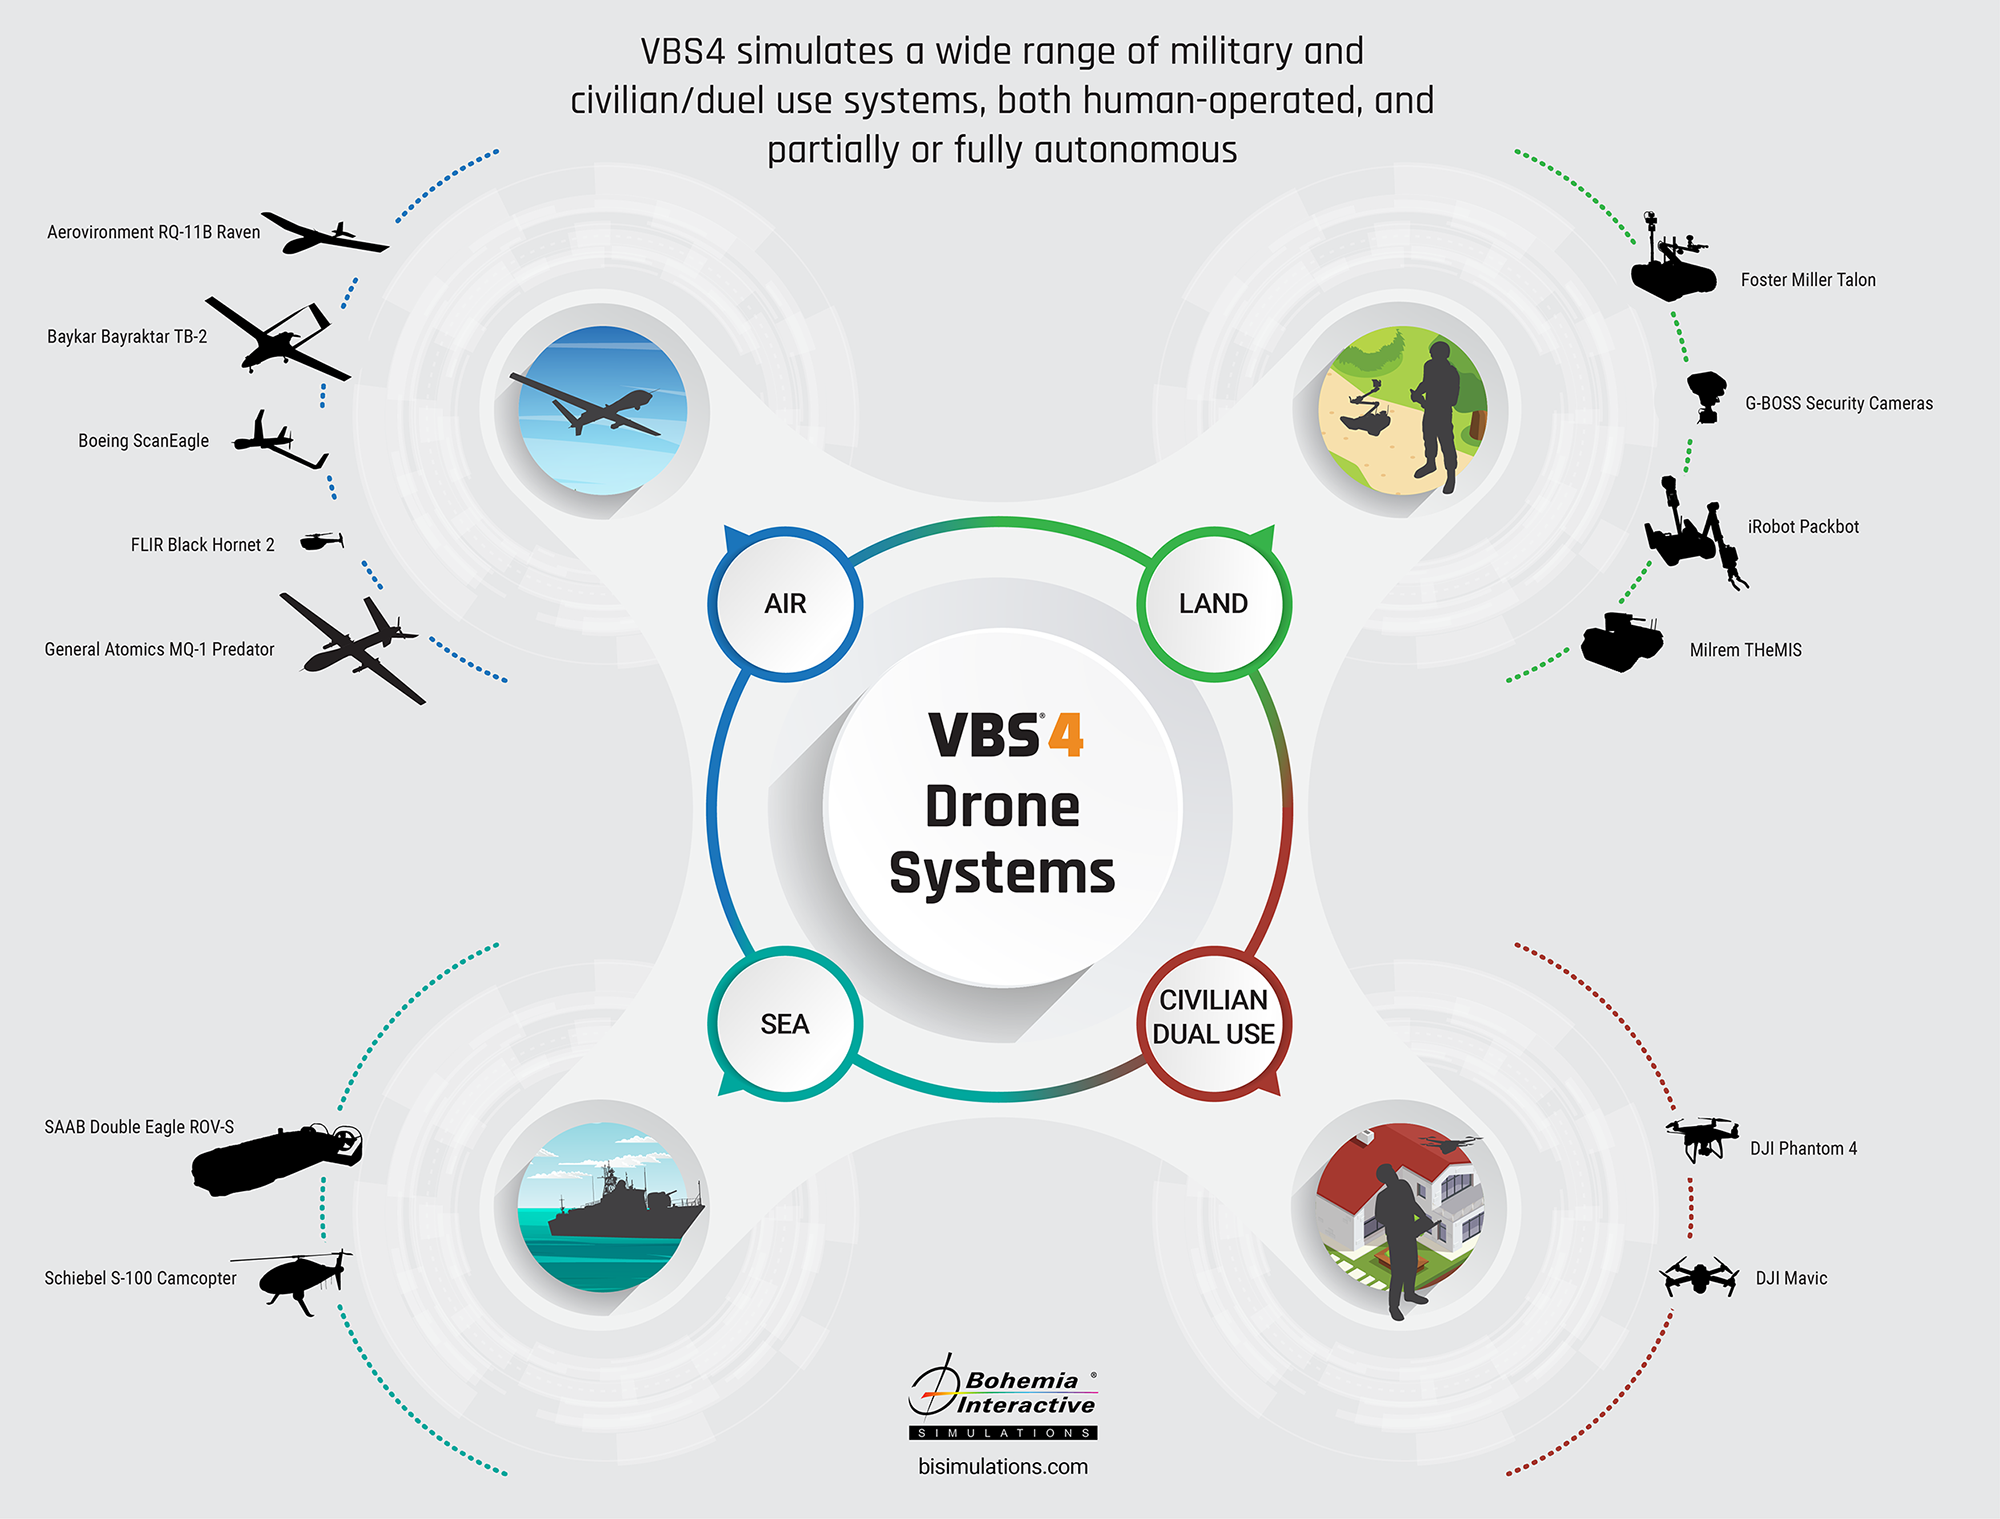 Infographic showcasing VBS4 drone systems. Download the infographic for an enlarged view.